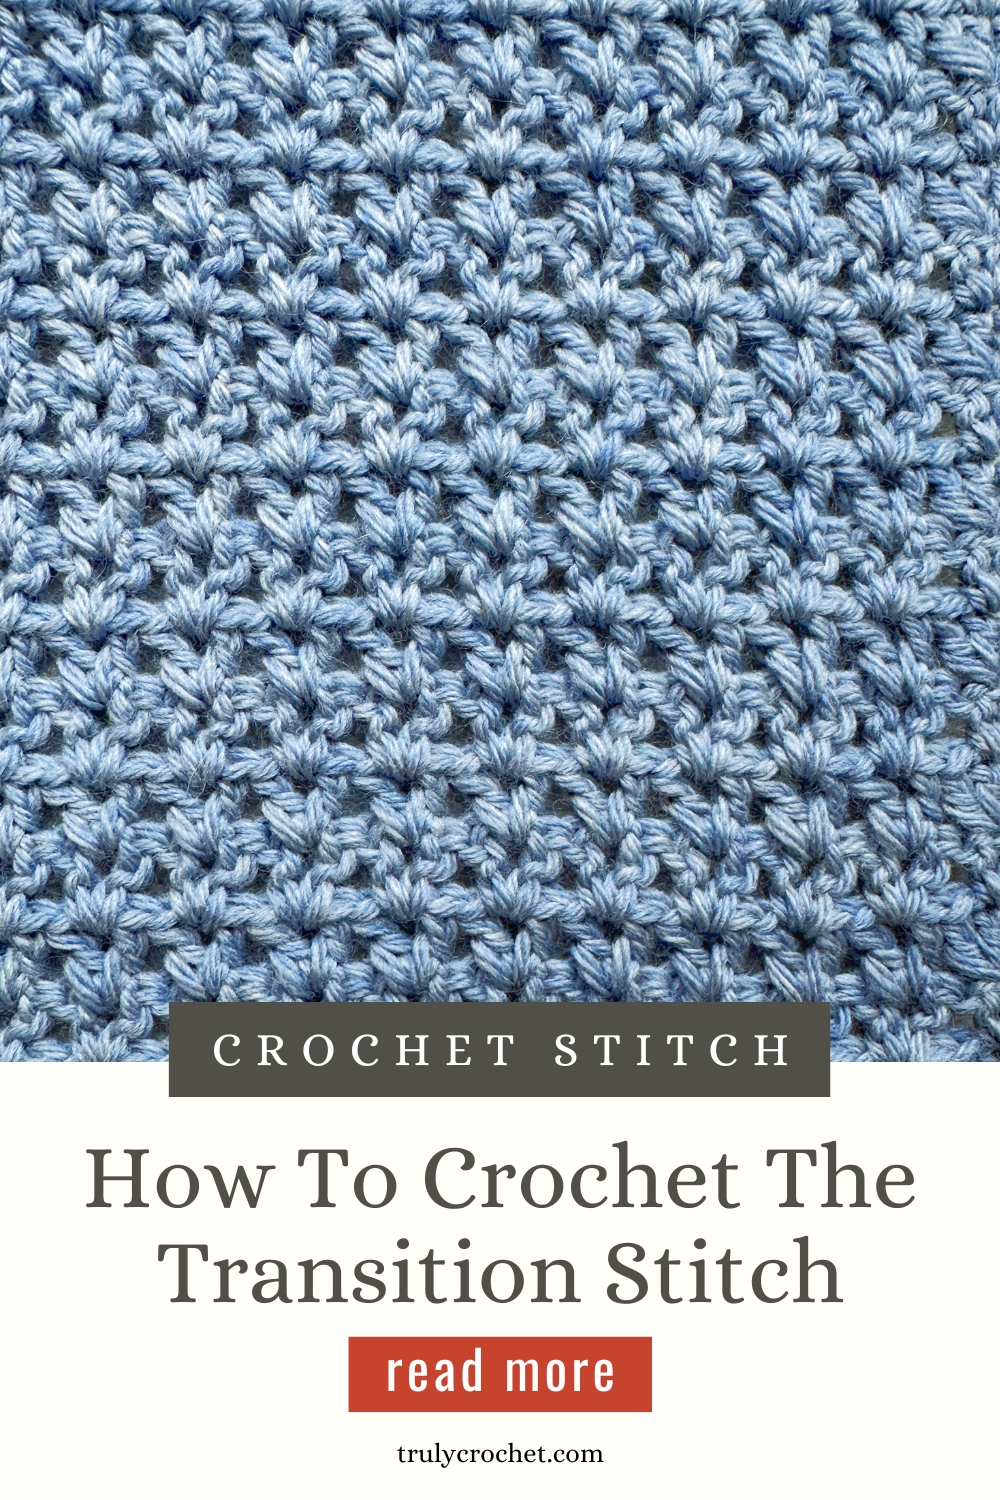 How To Crochet The transition stitch